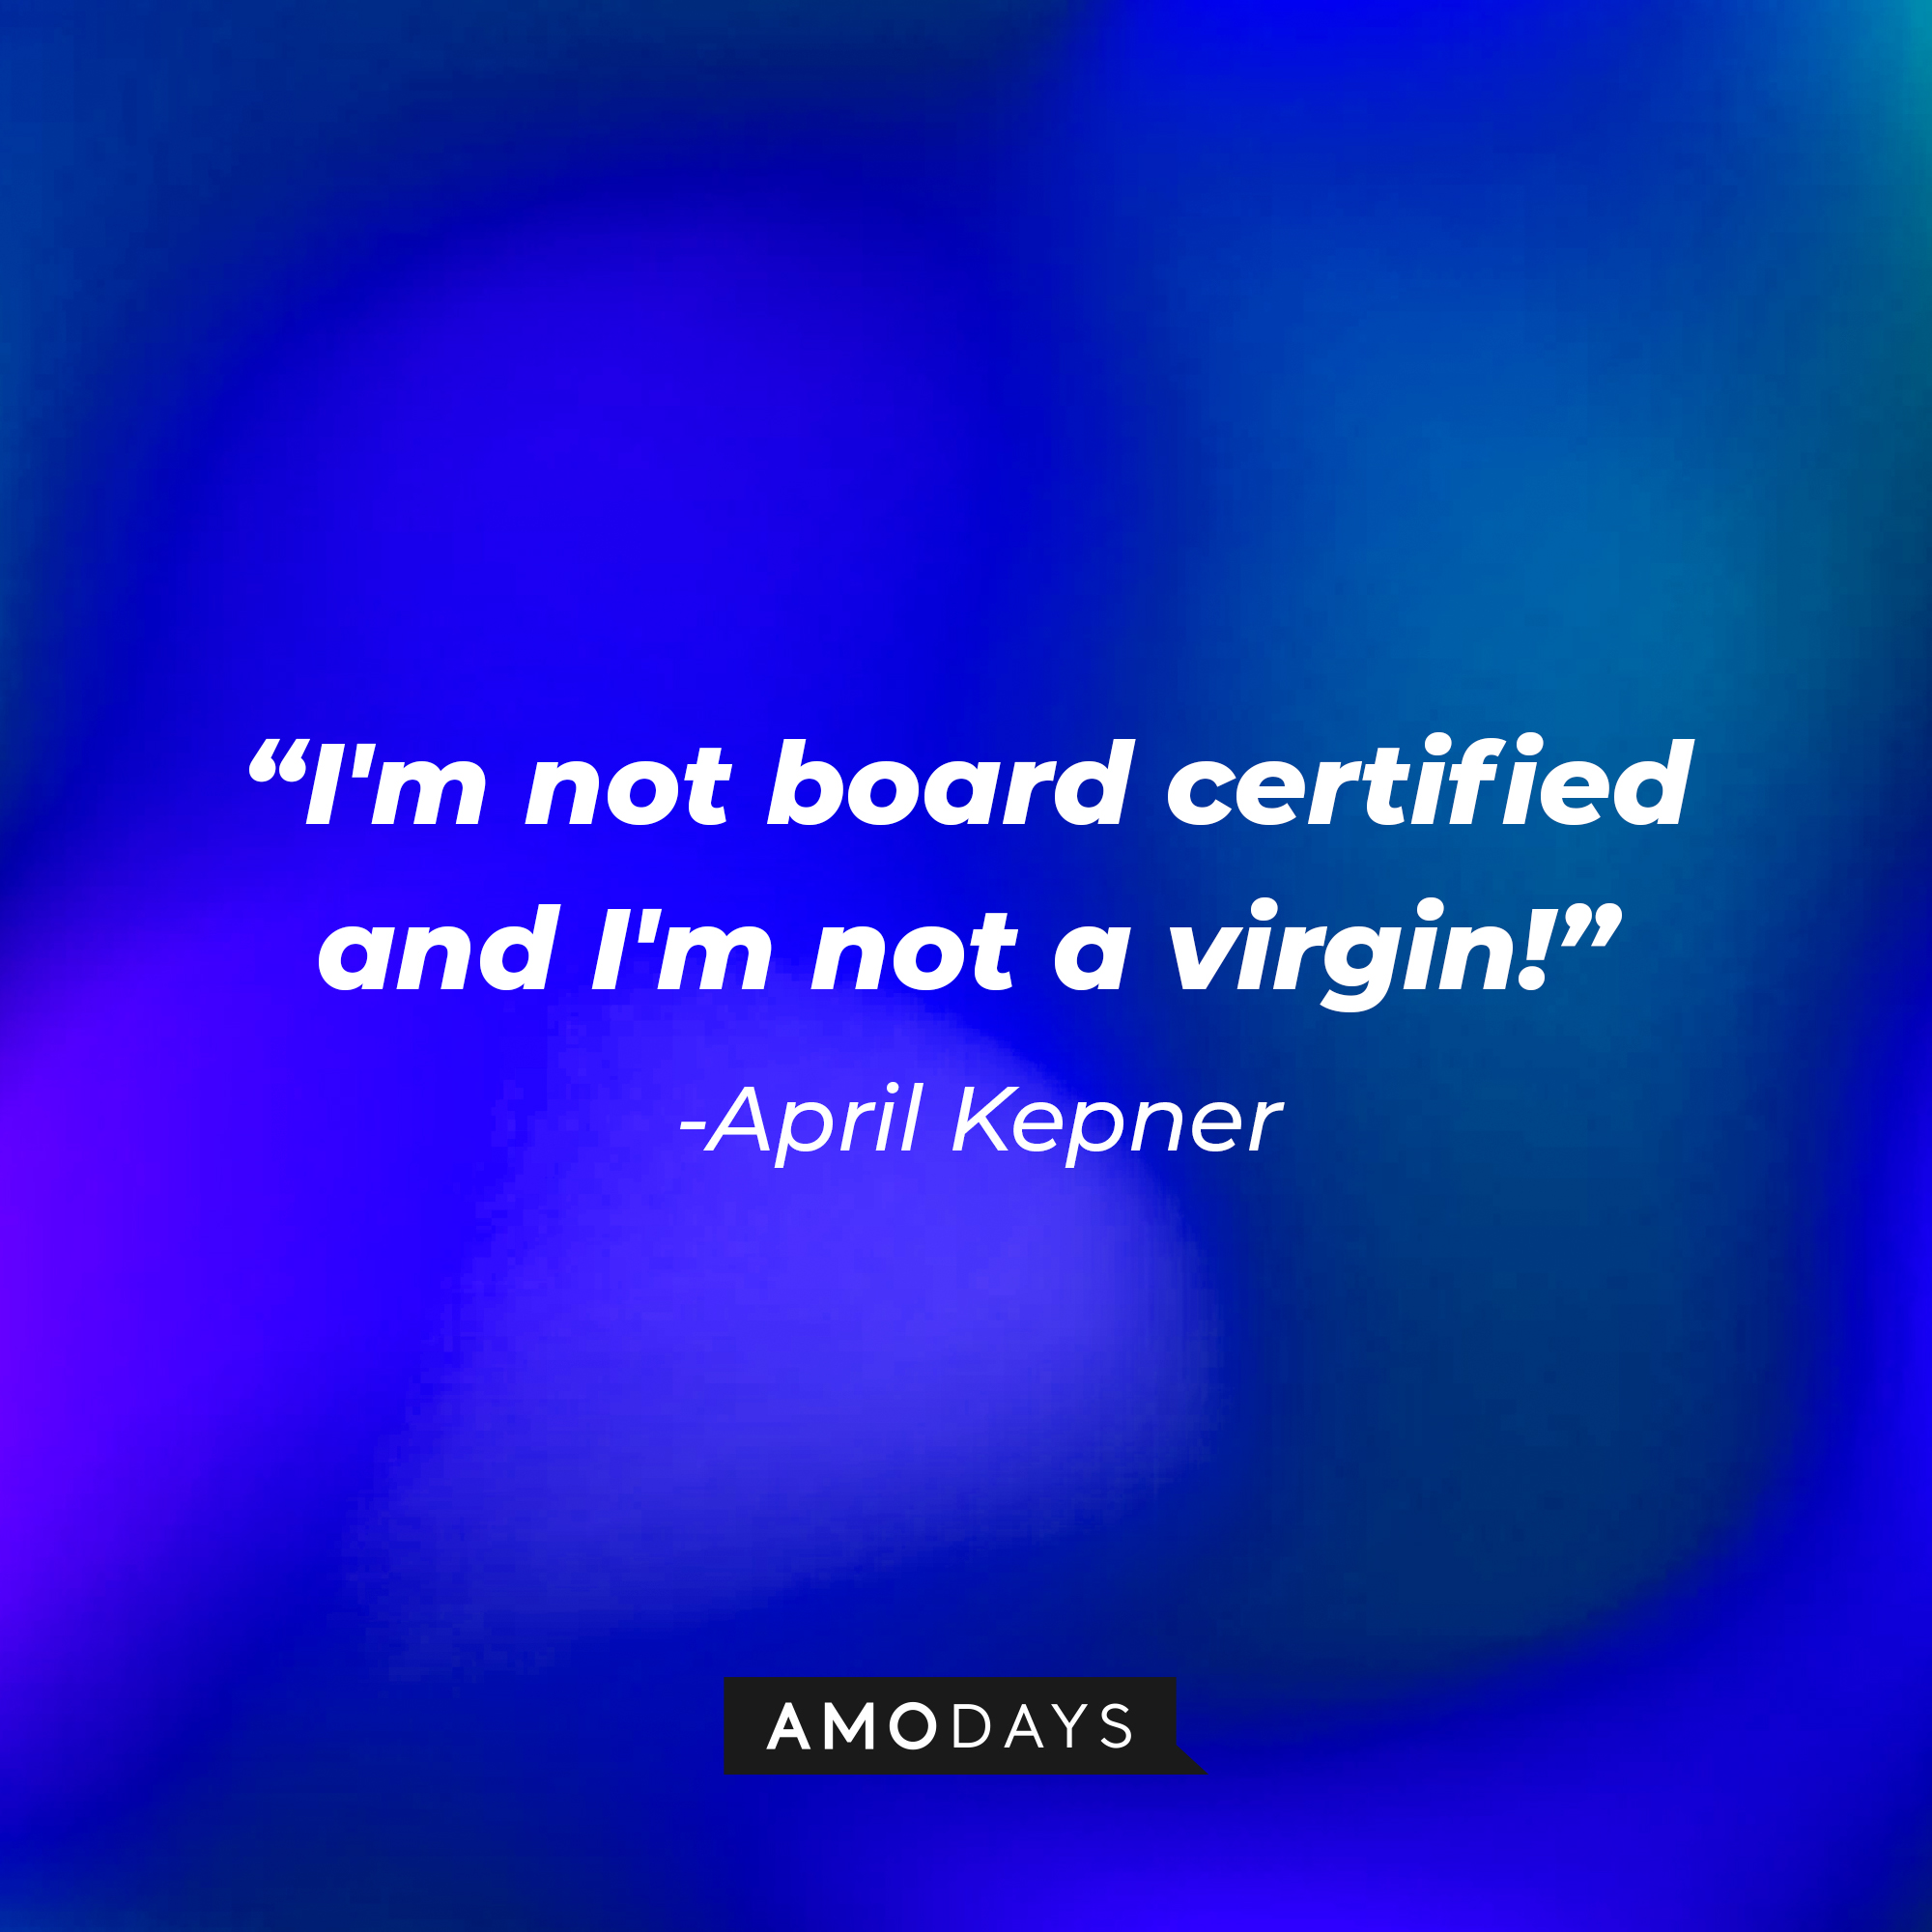 April Kepner's quote: "I'm not board certified and I'm not a virgin!" | Source: AmoDays